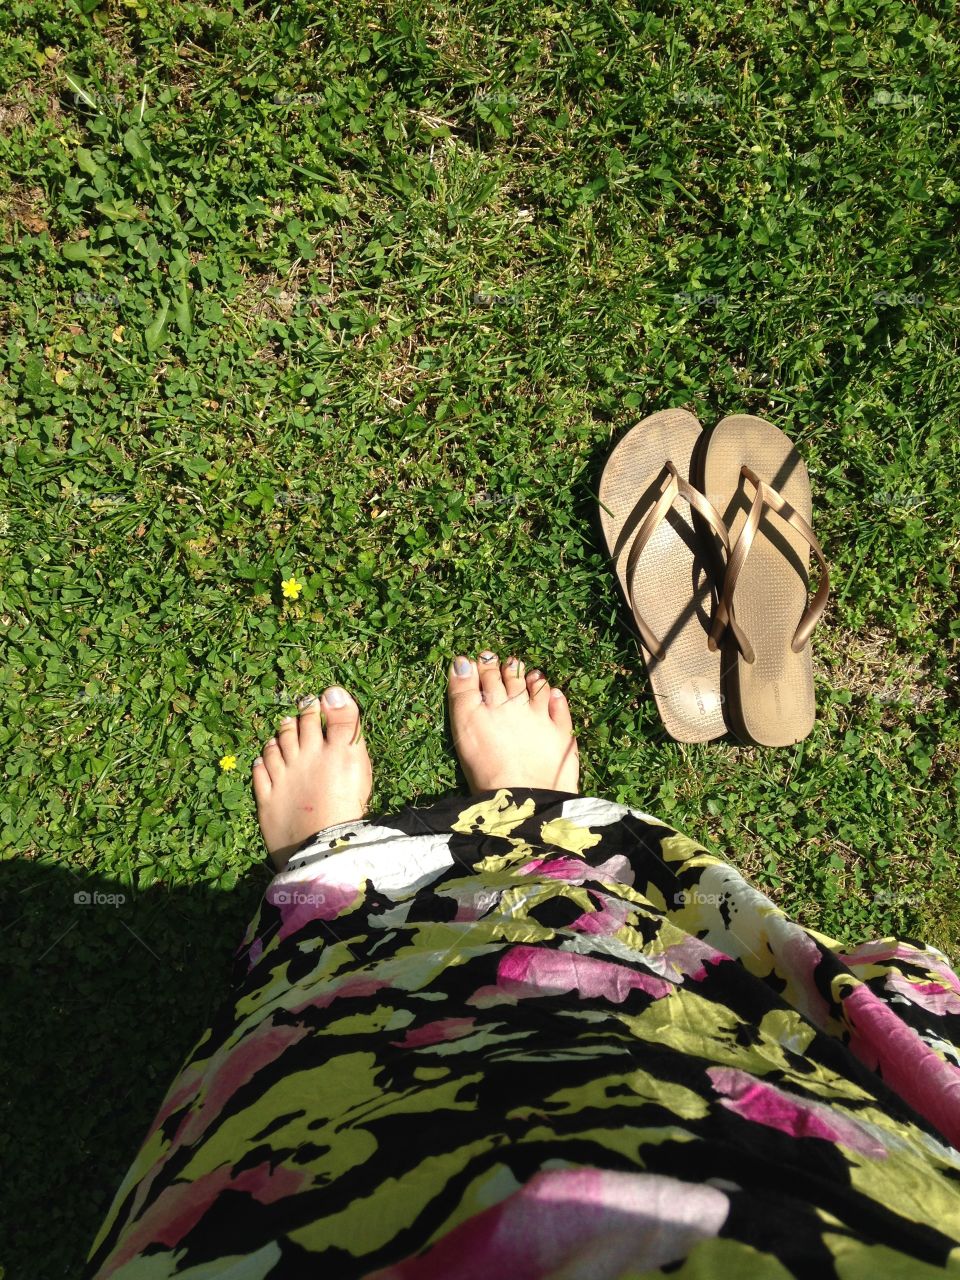 Toes in the grass. 